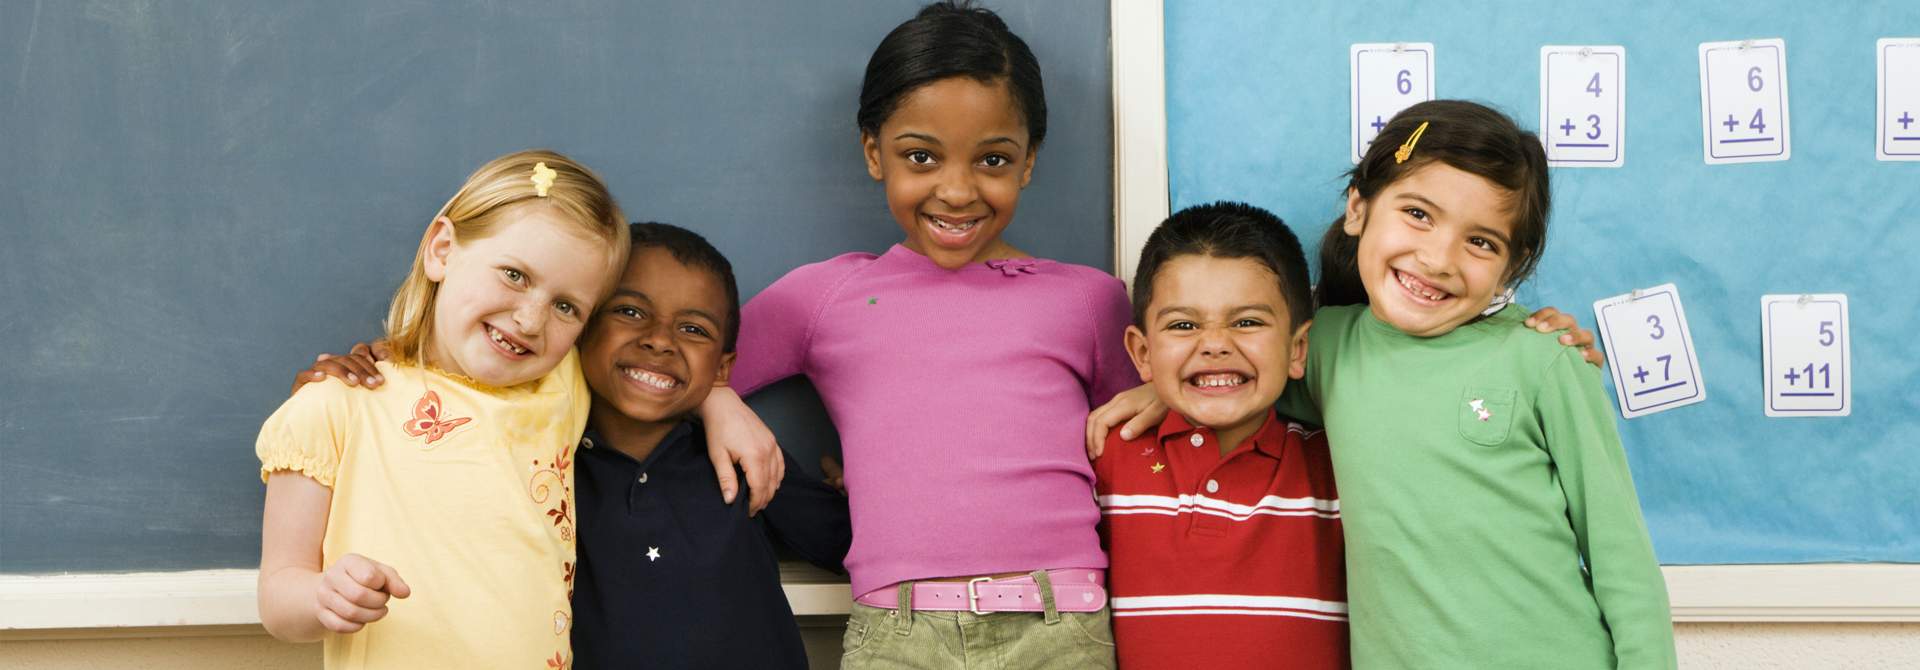 banner image with five smiling children